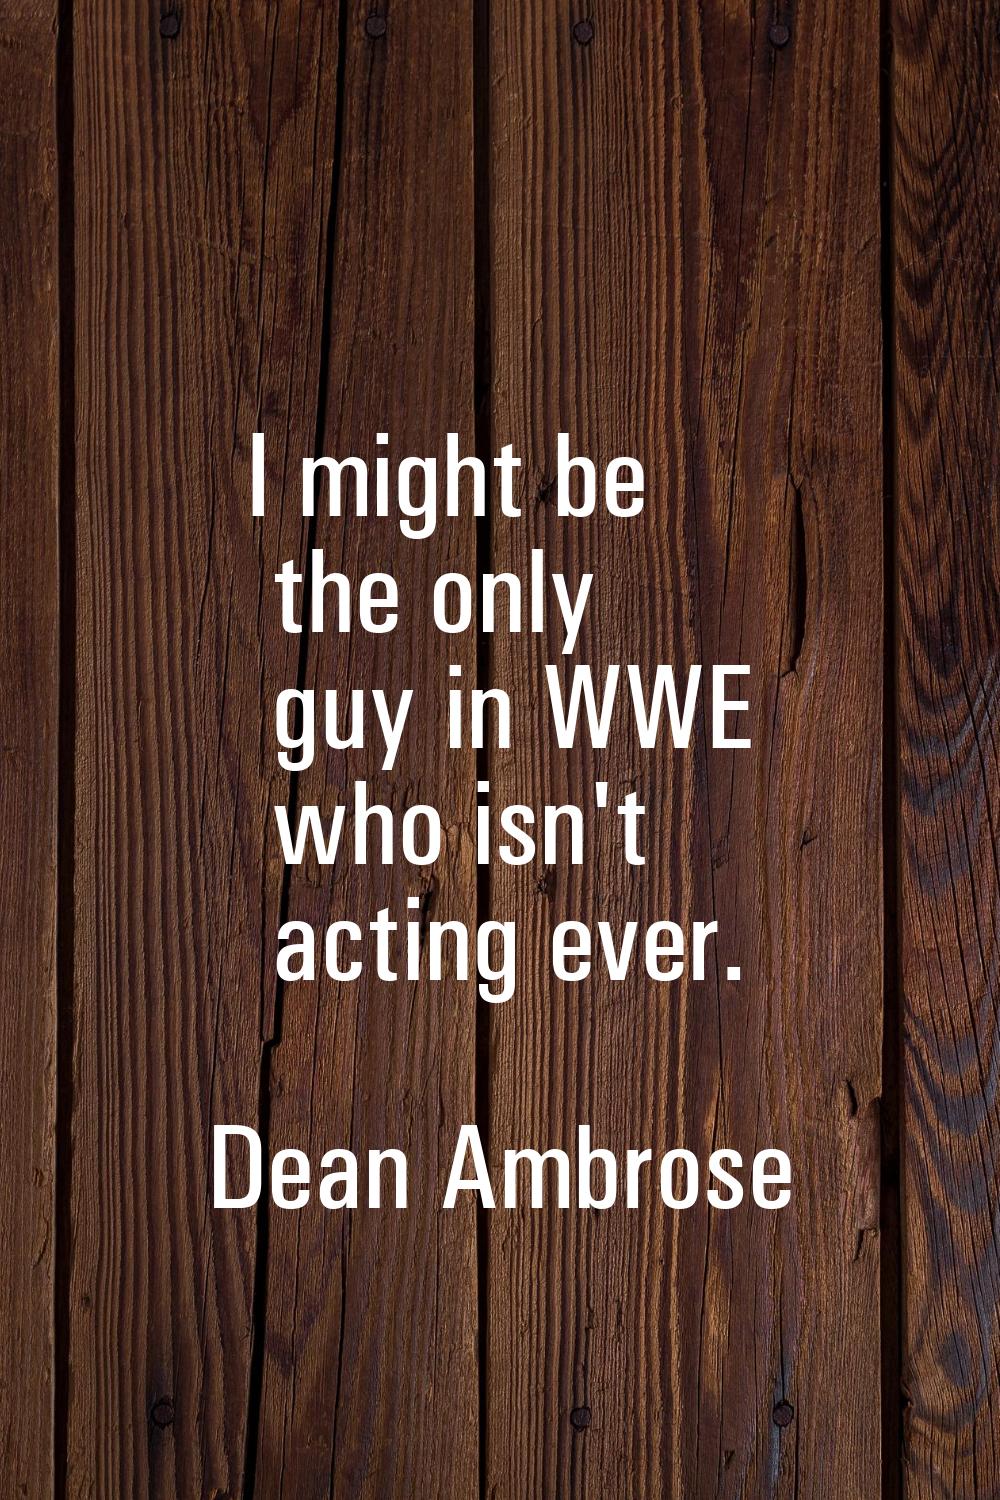 I might be the only guy in WWE who isn't acting ever.